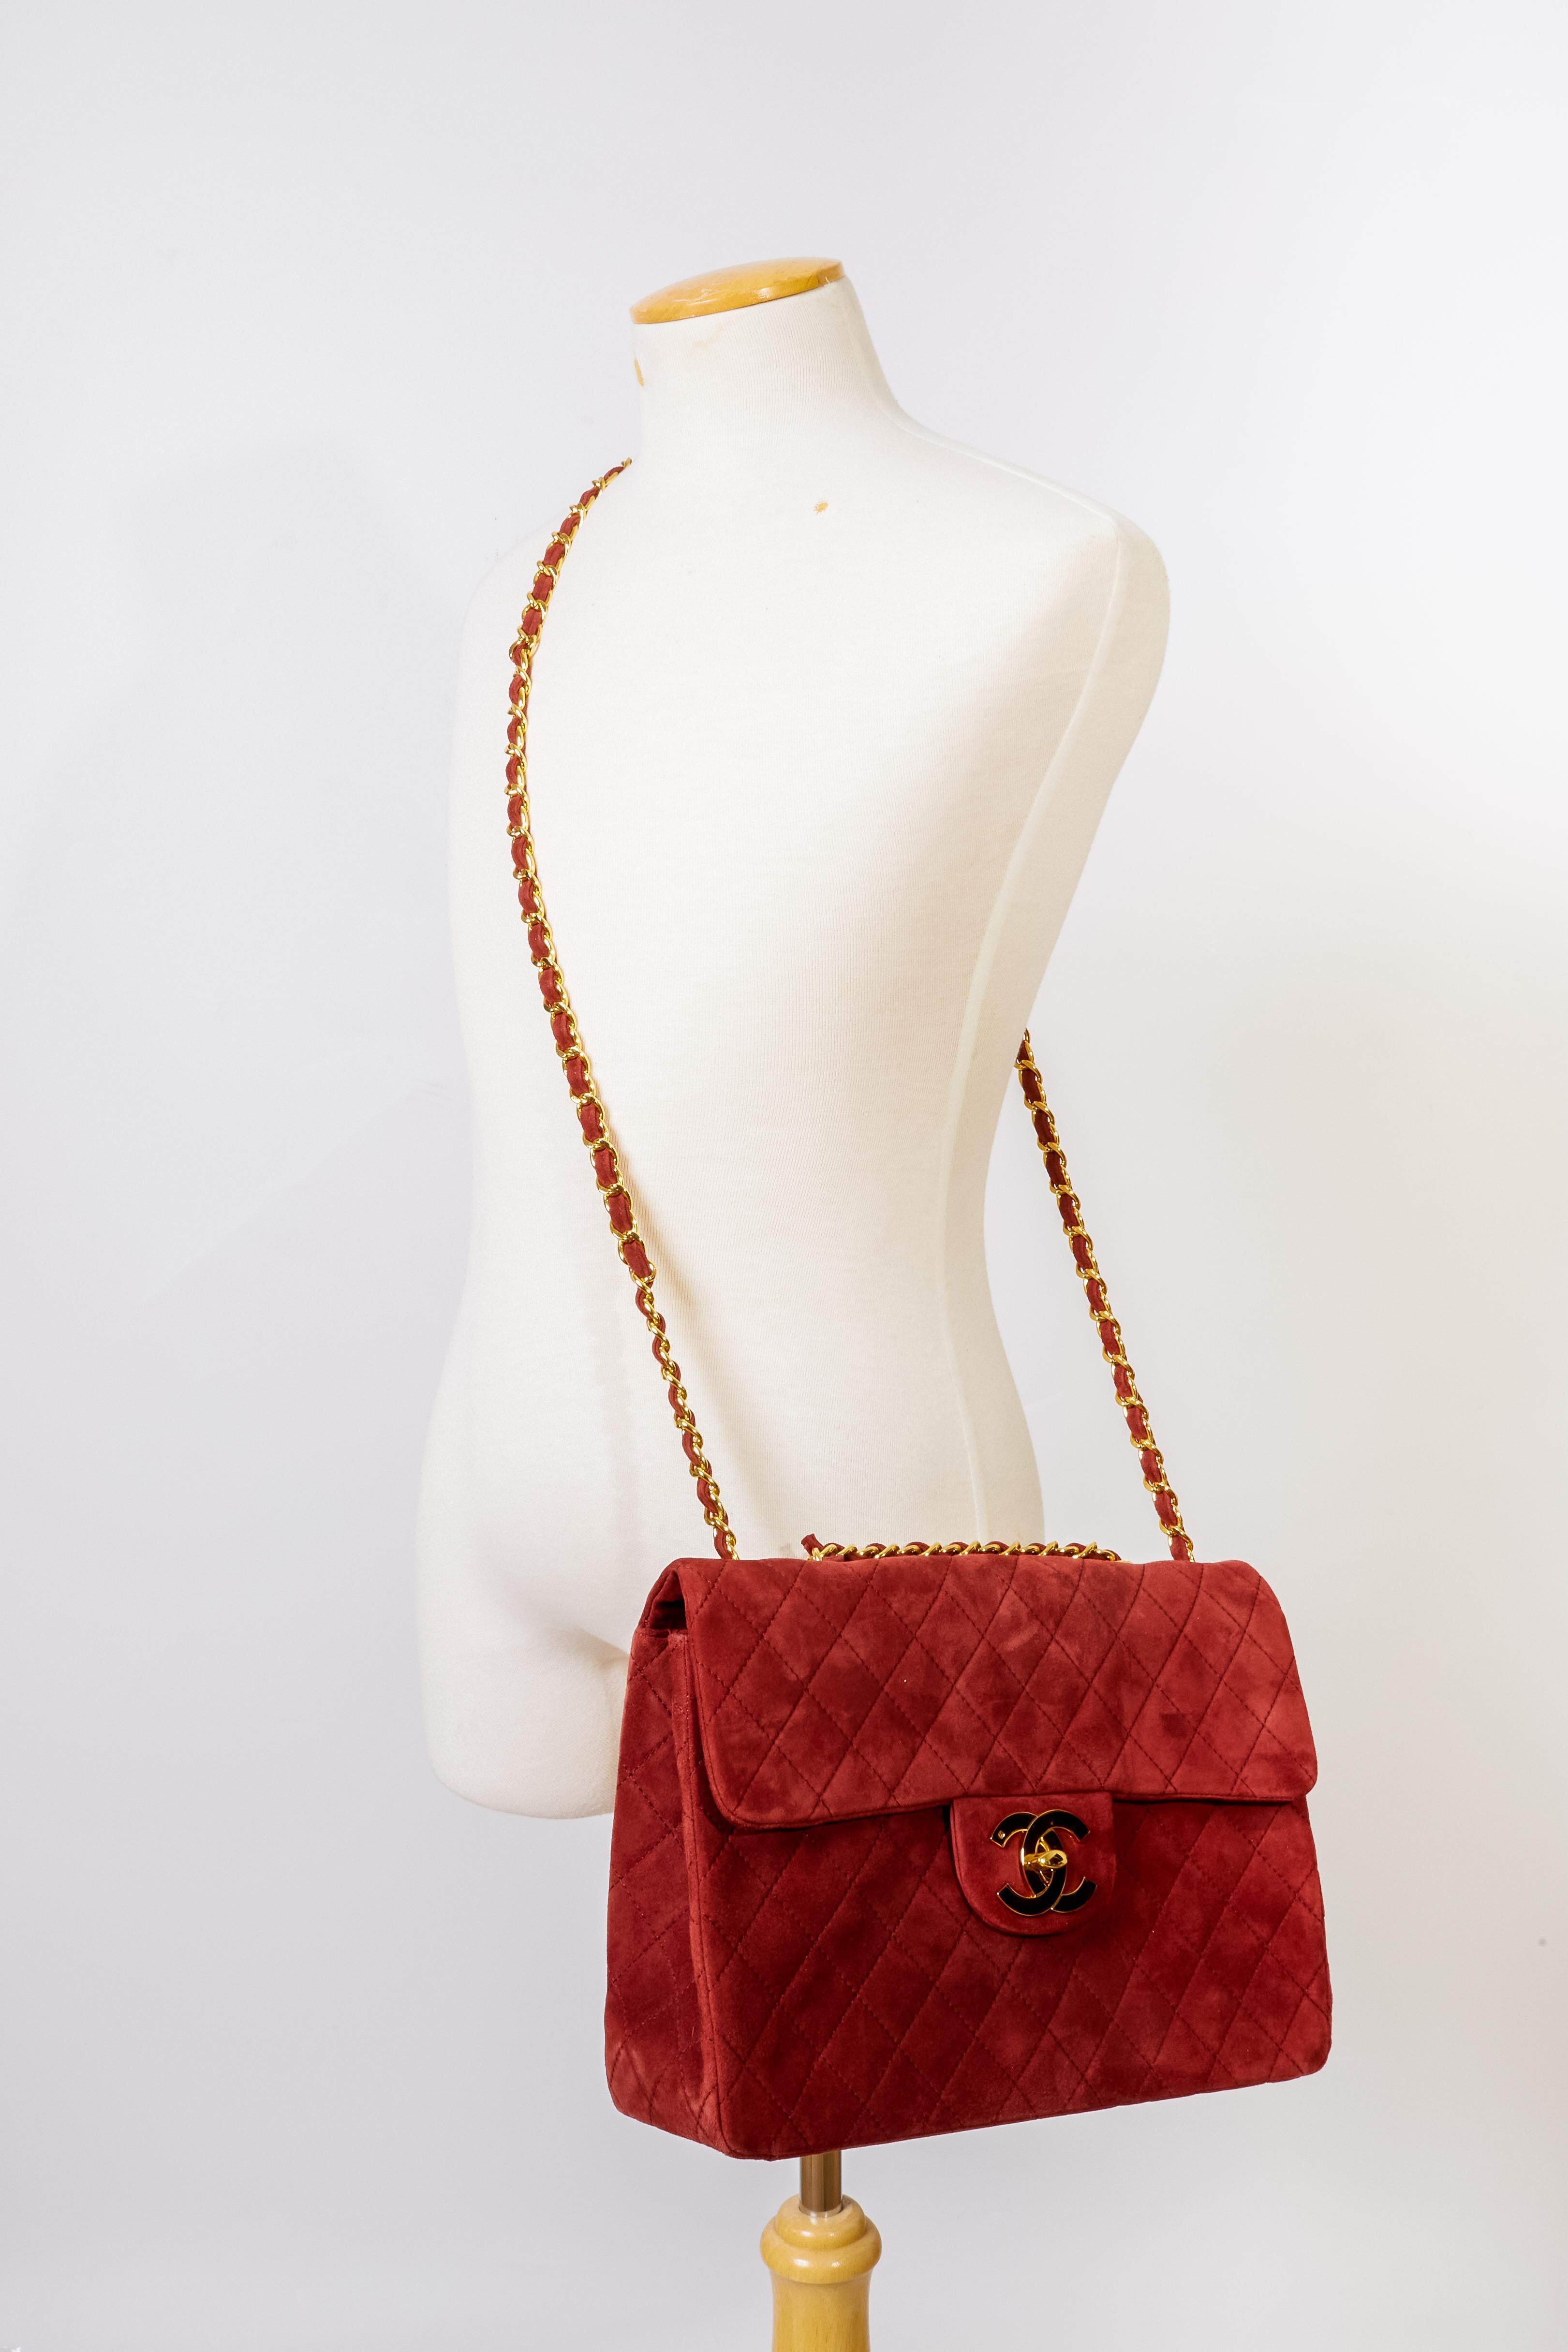 Chanel Classic Quilted Burgundy Suede Jumbo Single Flap Bag 5